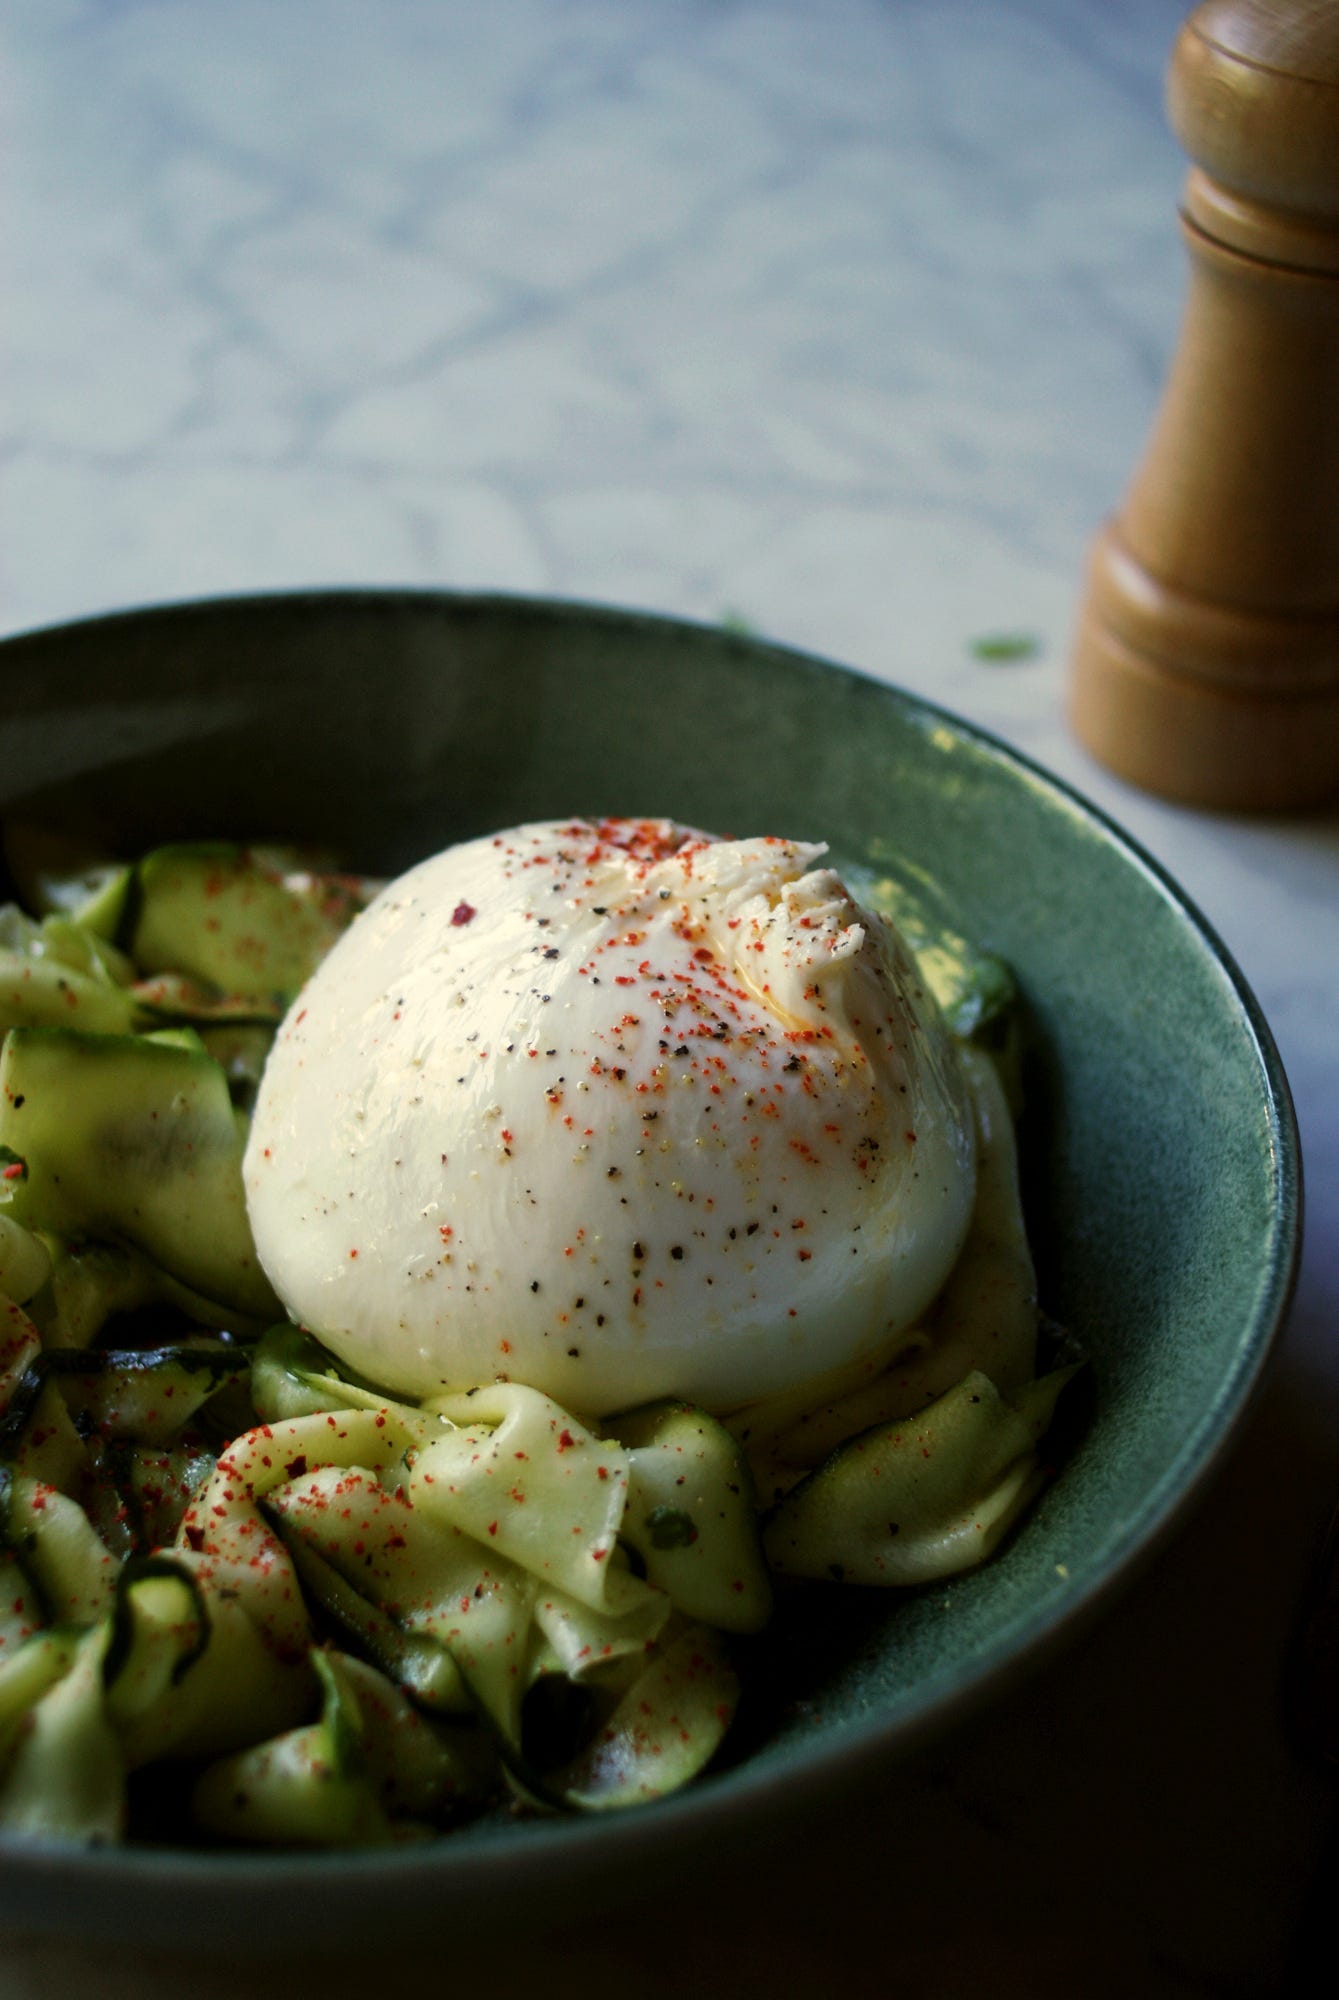 burrata salad from france with love